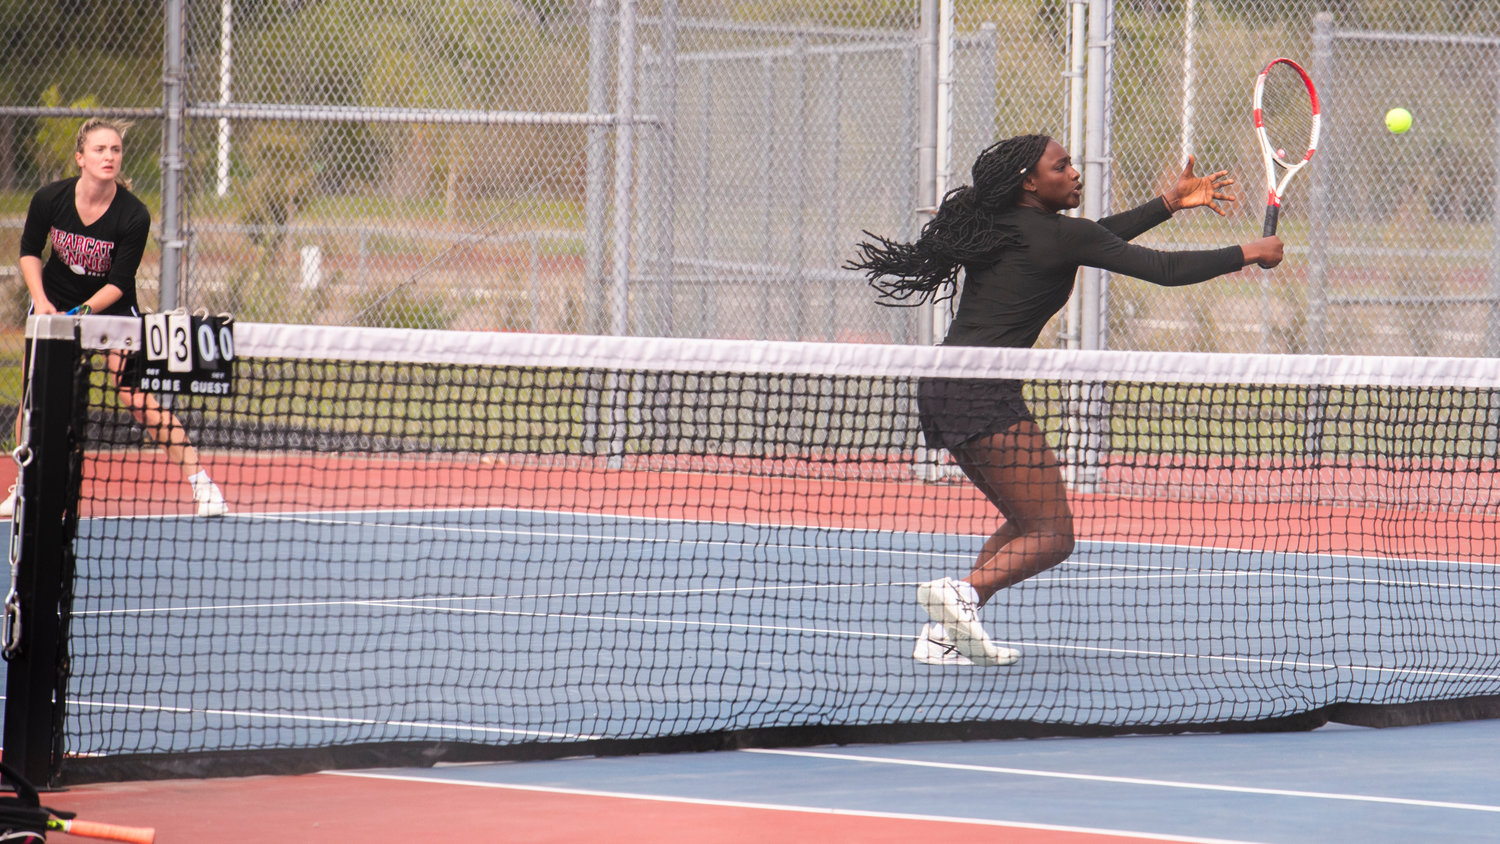 W.F. West’s Mariama Ceesay looks to return a shot at the net in front of her partner Kaylynne Dowling during a doubles match at A.G. West Black Hills High School Tuesday afternoon in Tumwater.